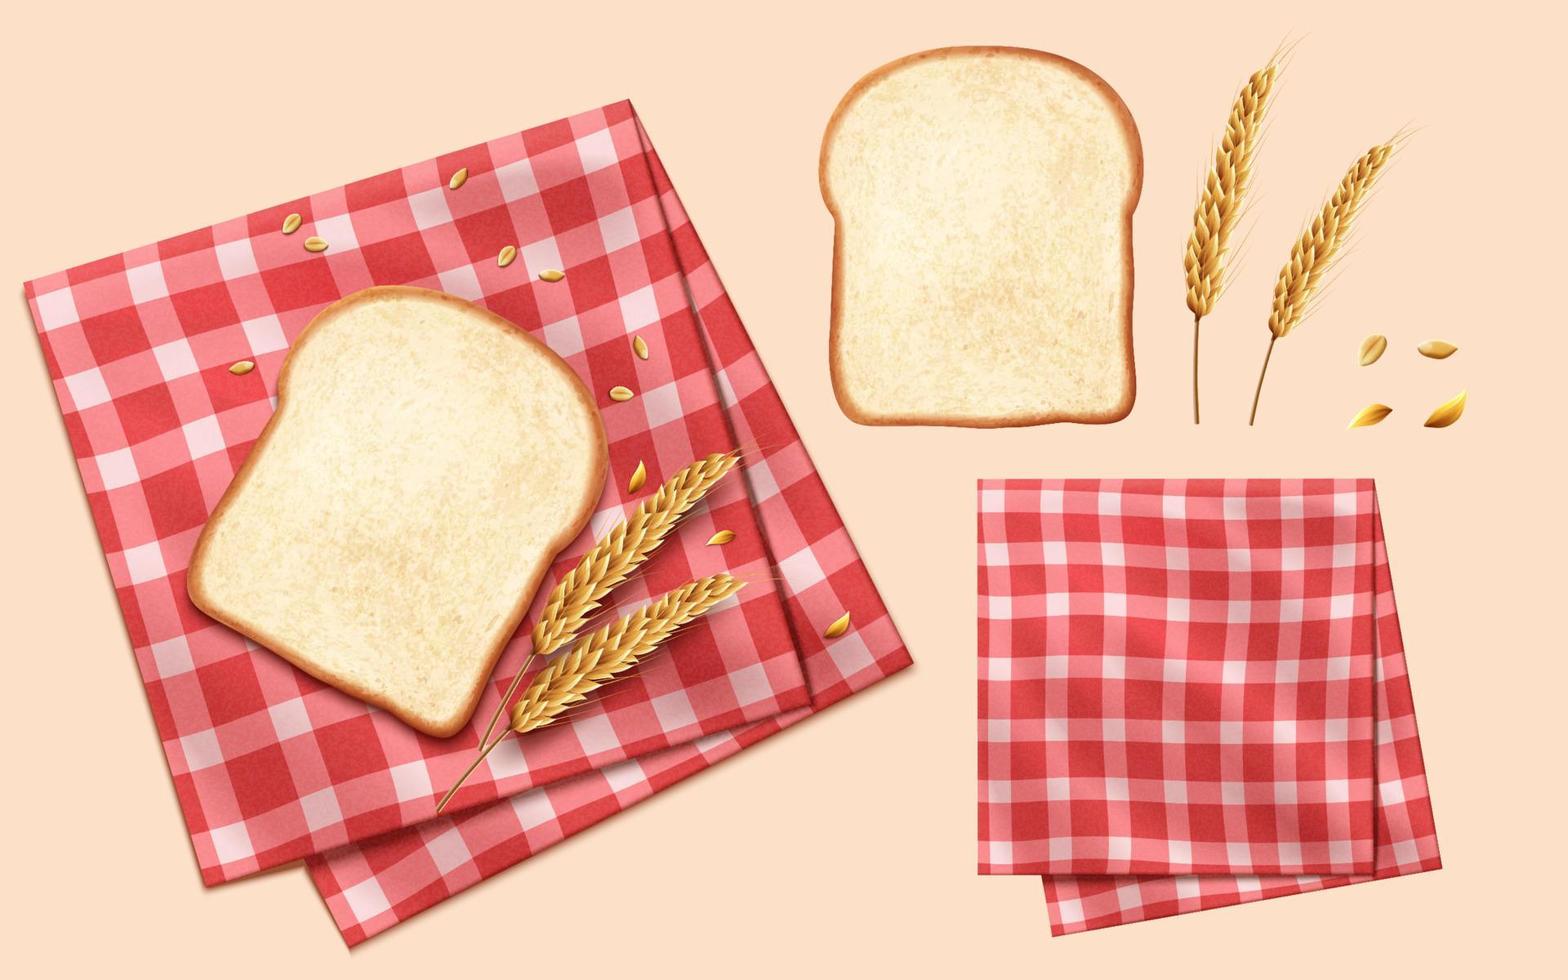 3D Elements of white toast, wheat sheaves, and grains on a red gingham tablecloth vector